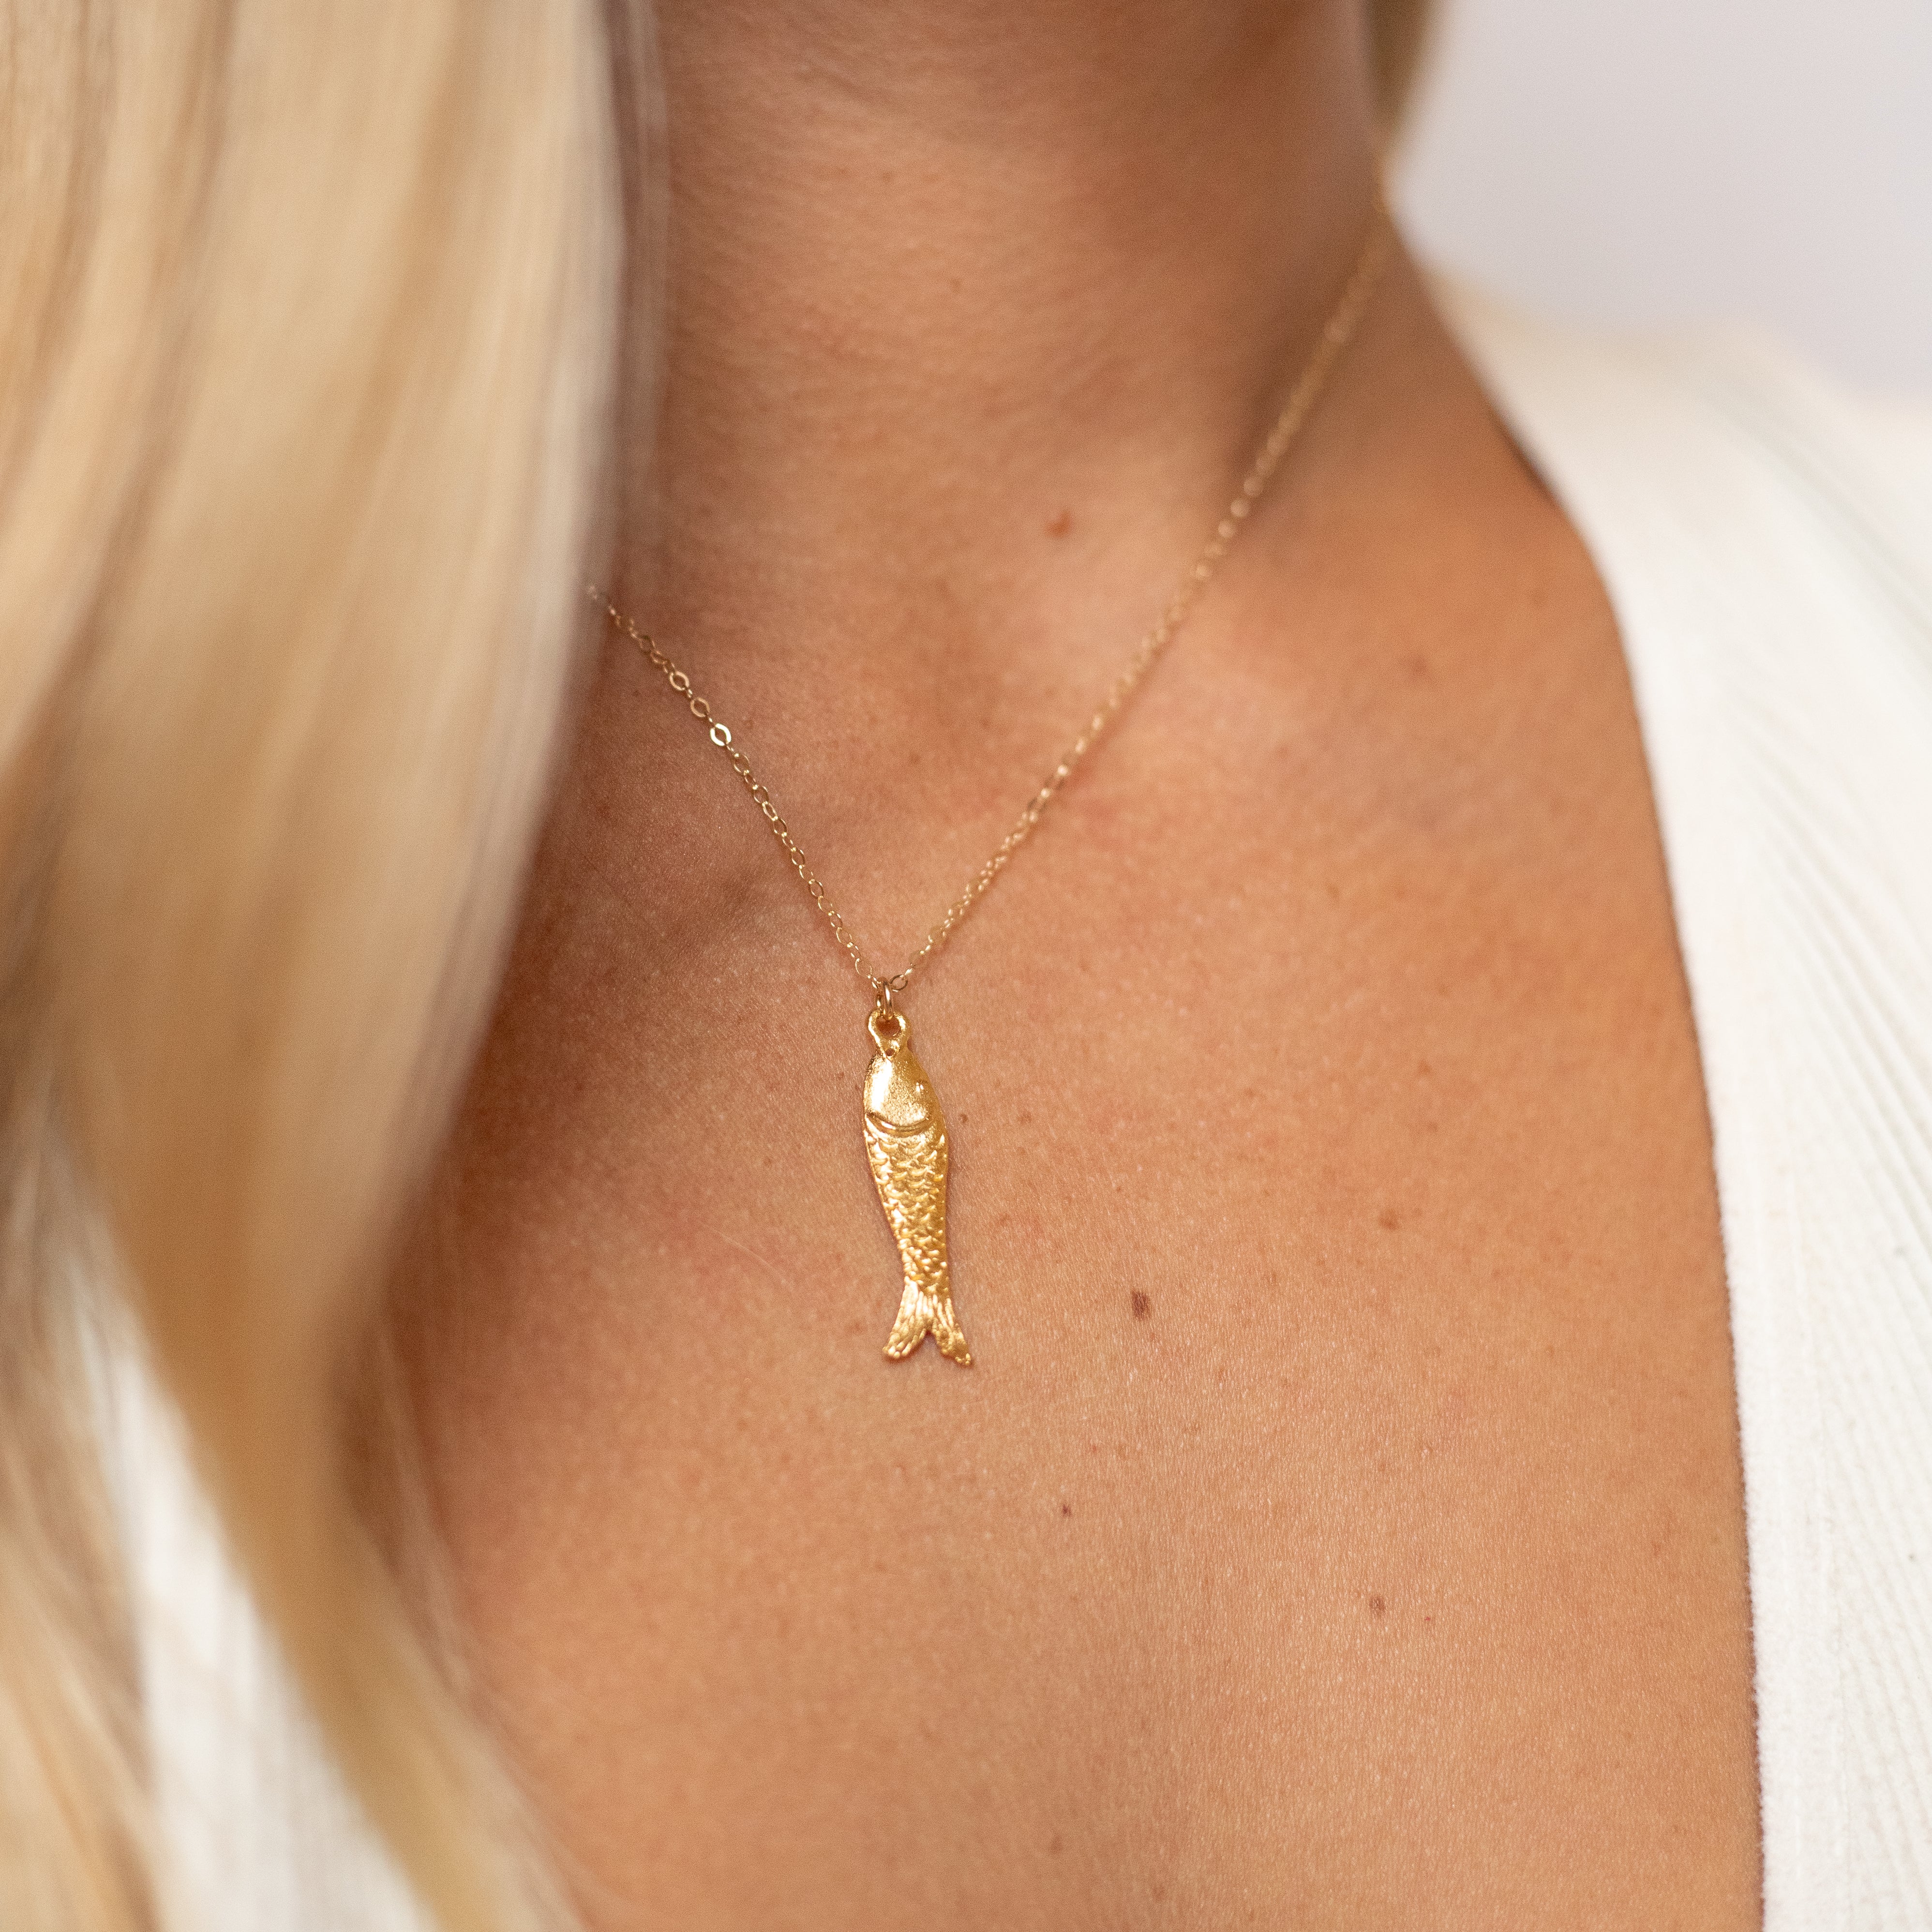 One inch long gold fish charm on a gold chain, shown on a woman's neck. 